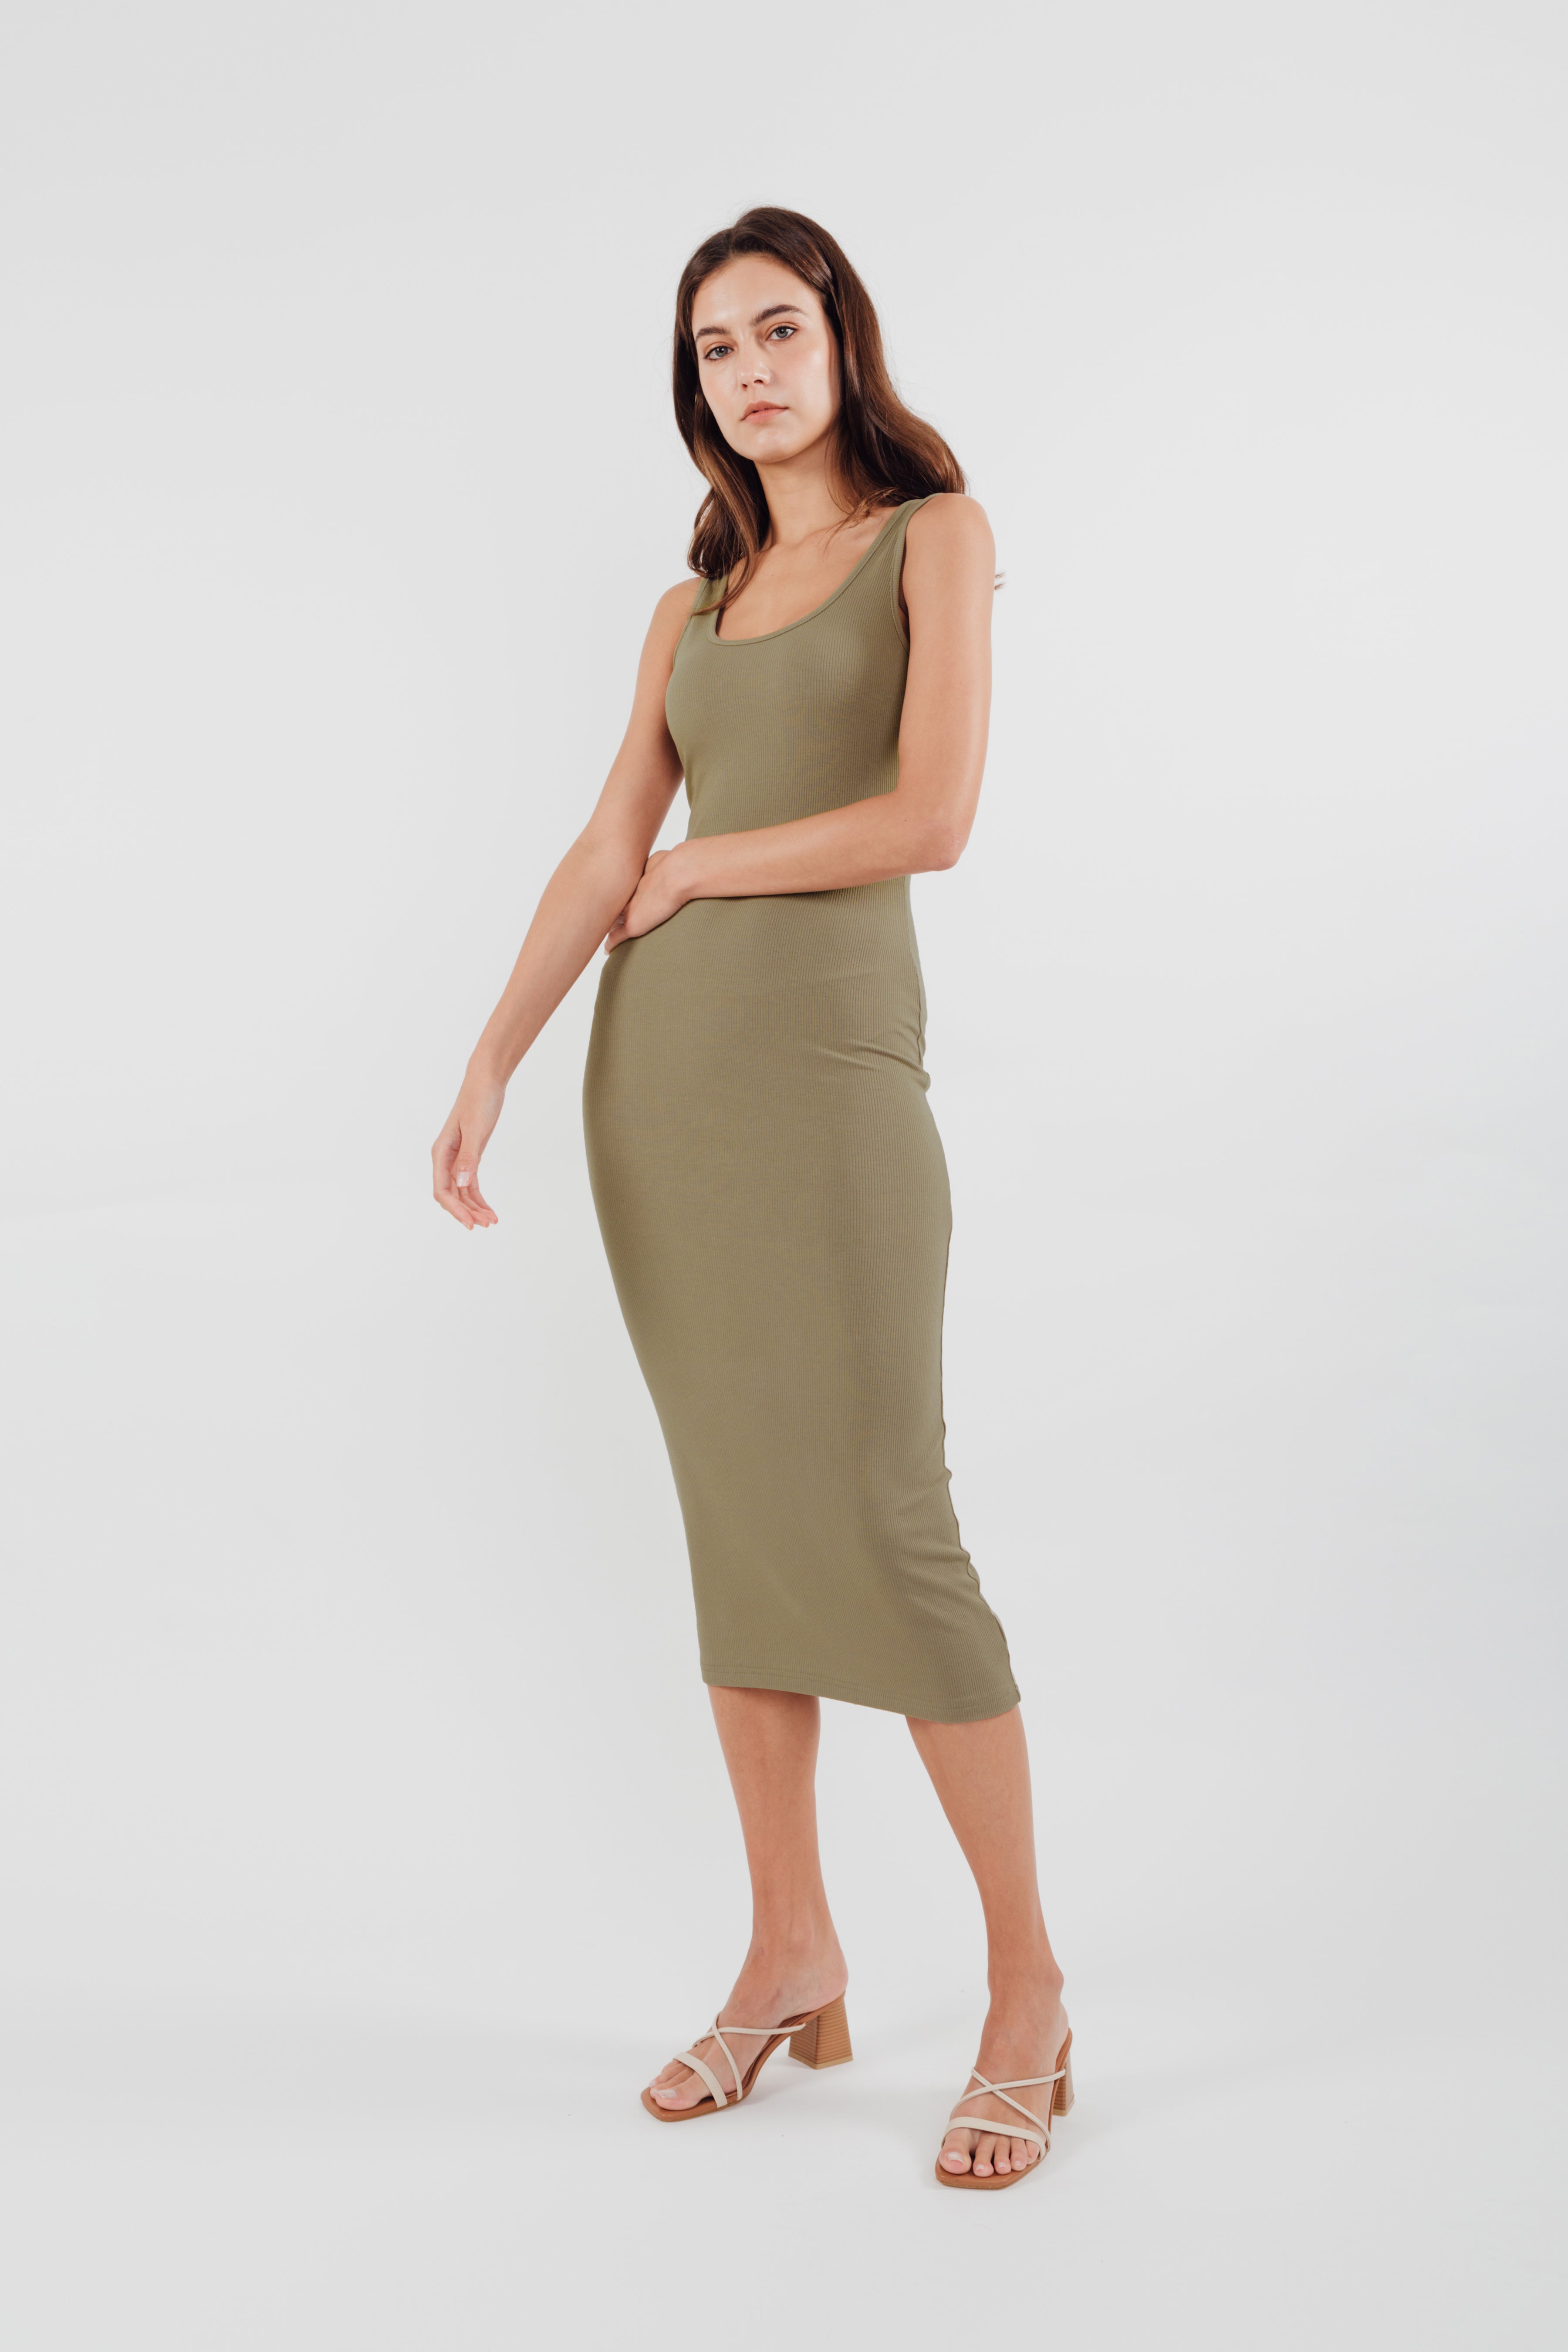 Round Neck Knit Dress in Olive